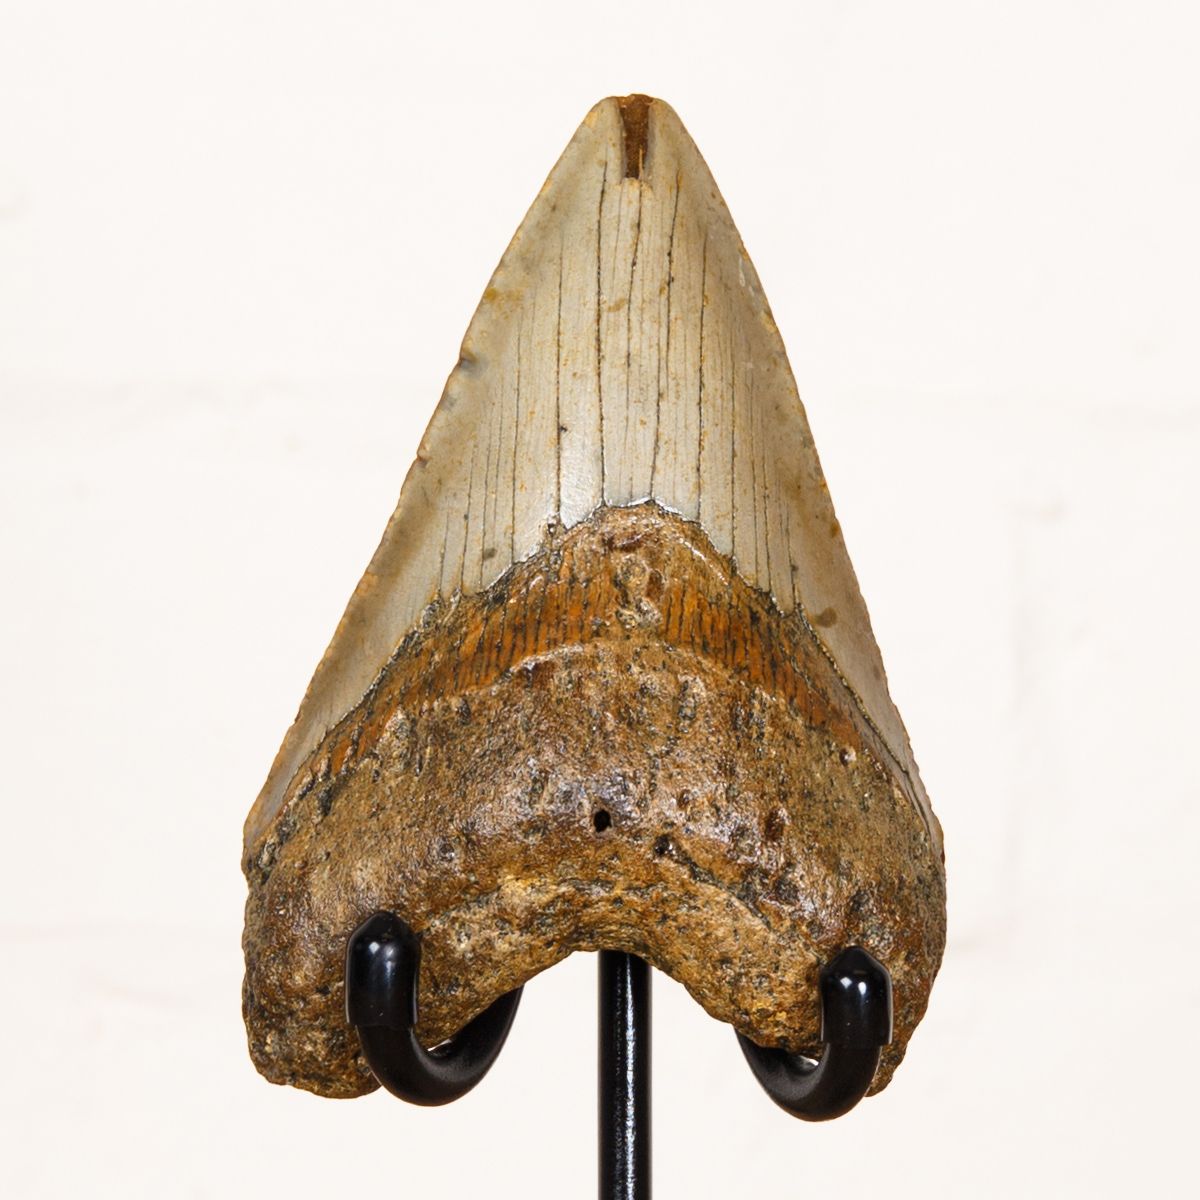 Huge 4.5 Inch Megalodon Shark Tooth Fossil on Stand (Carcharodon megalodon)